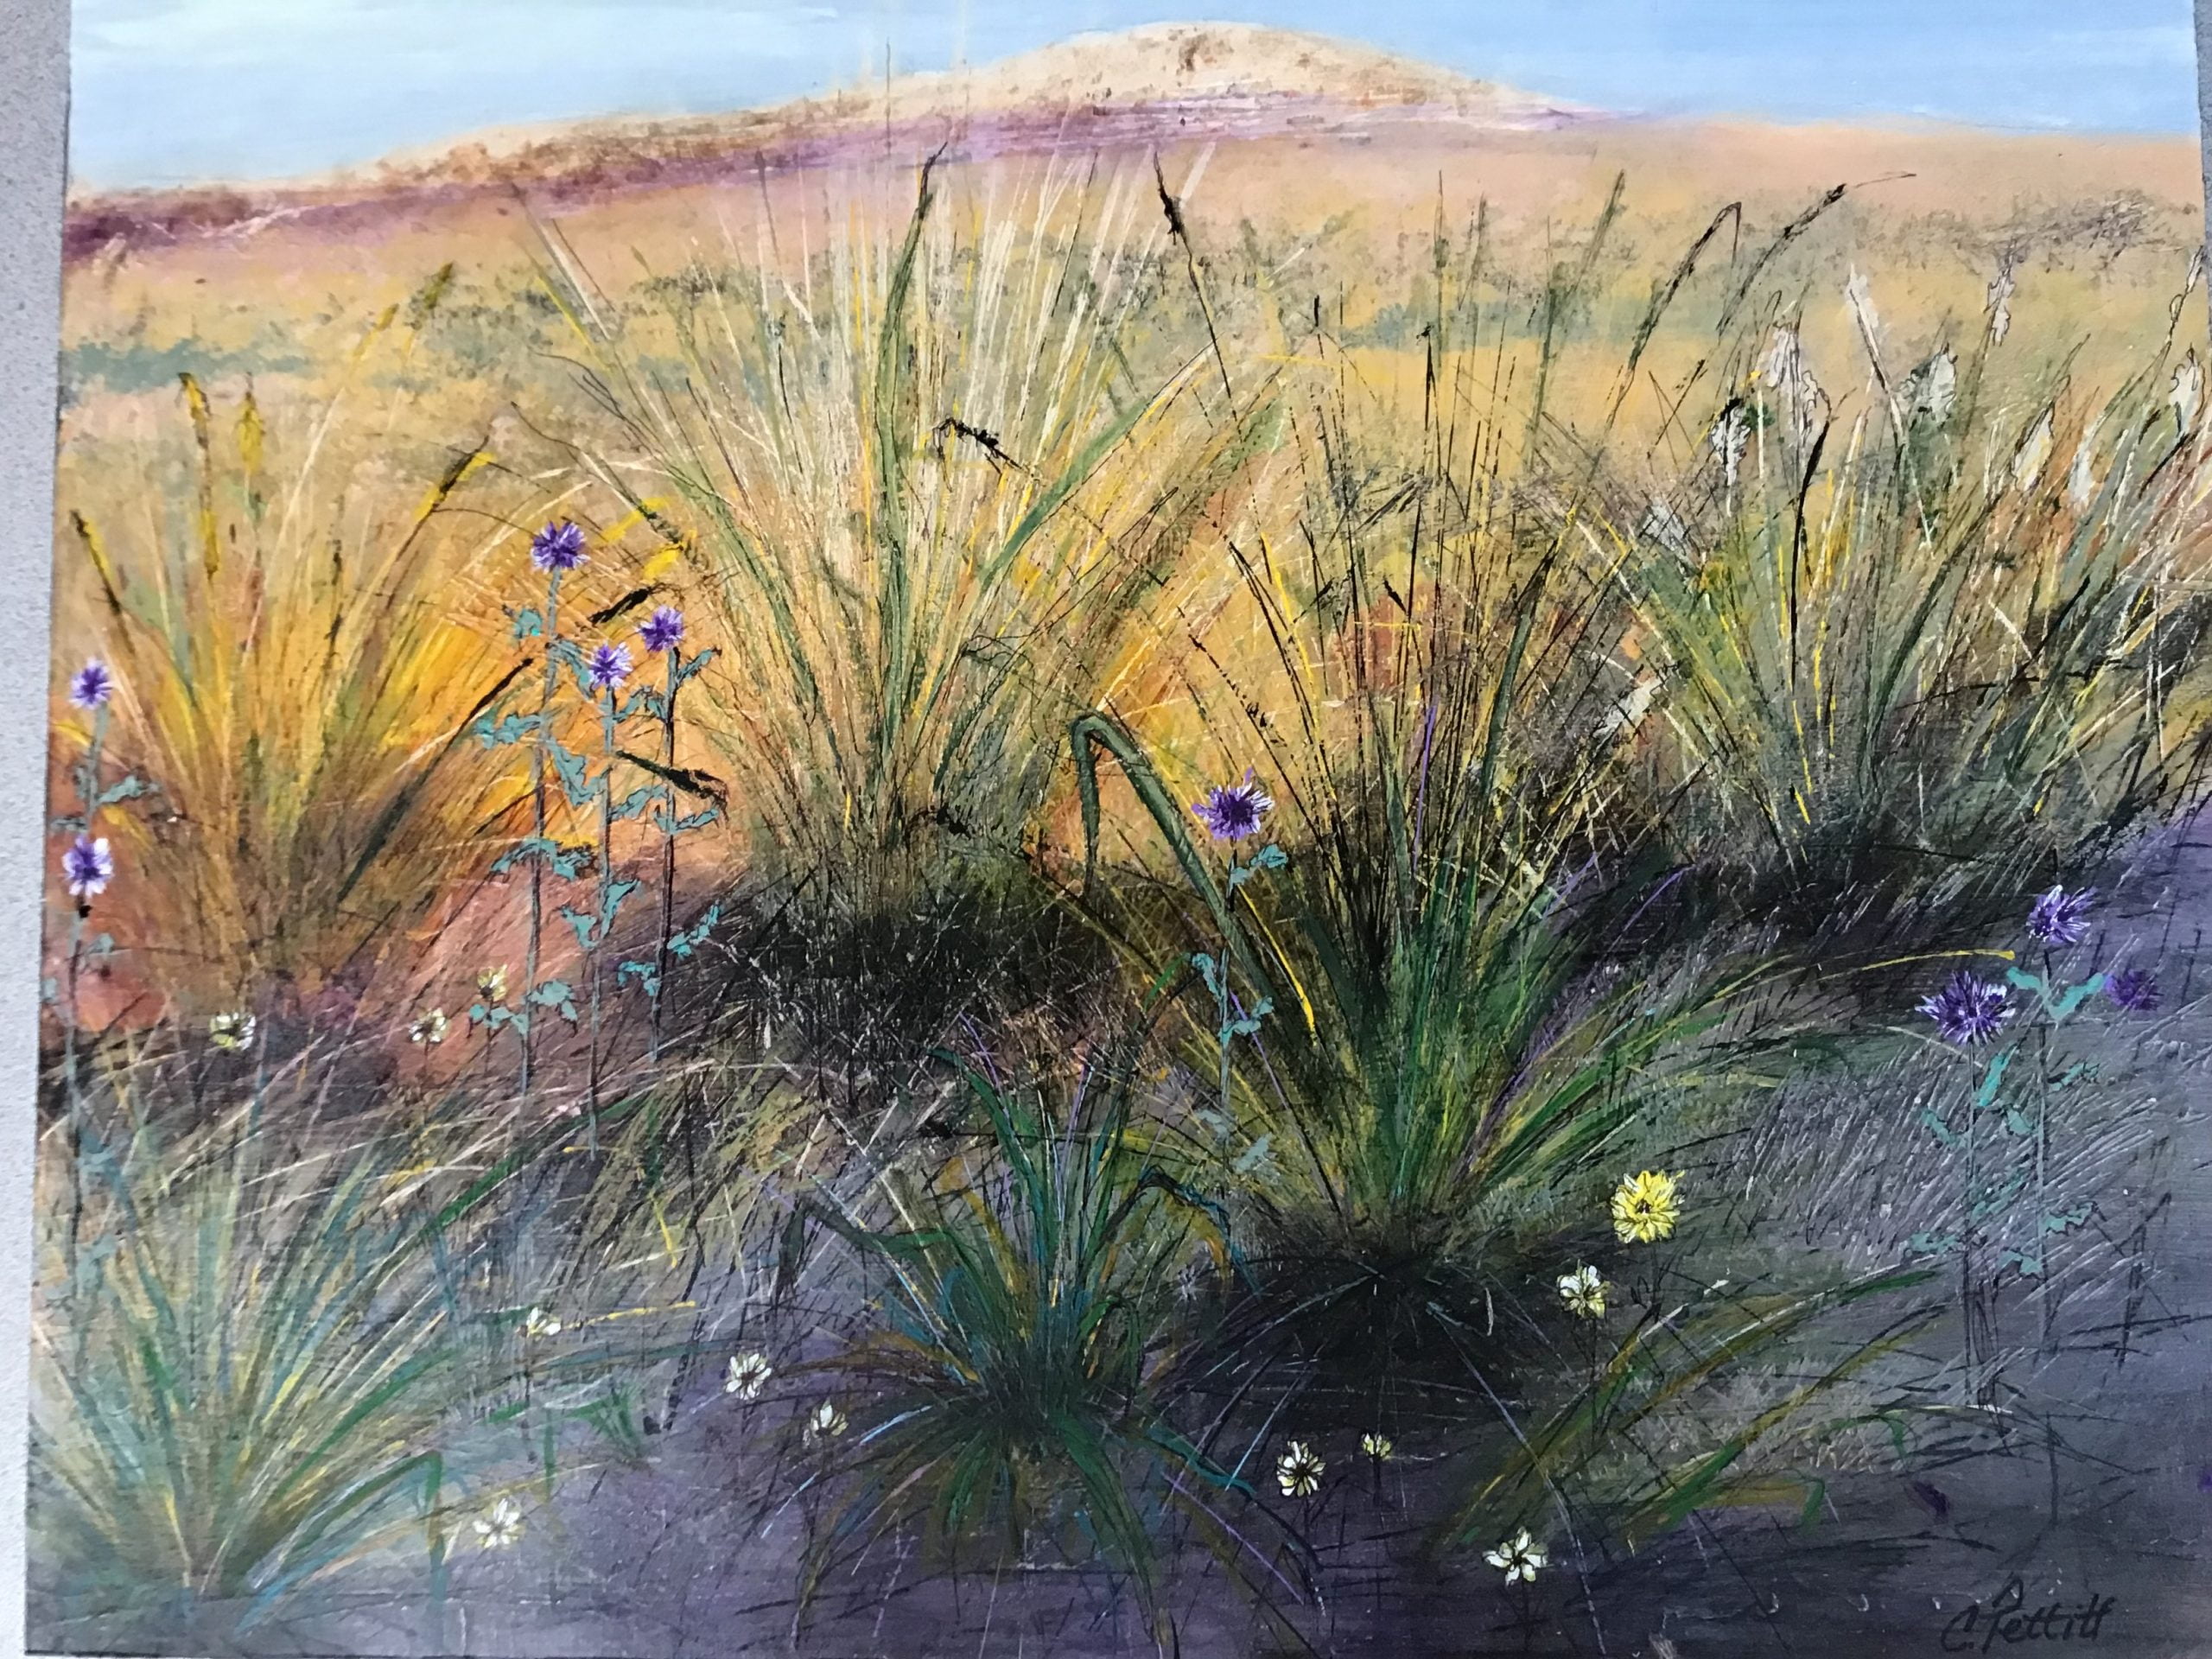 Textured landscape with grass and flowers by Carolyn Pettitt.